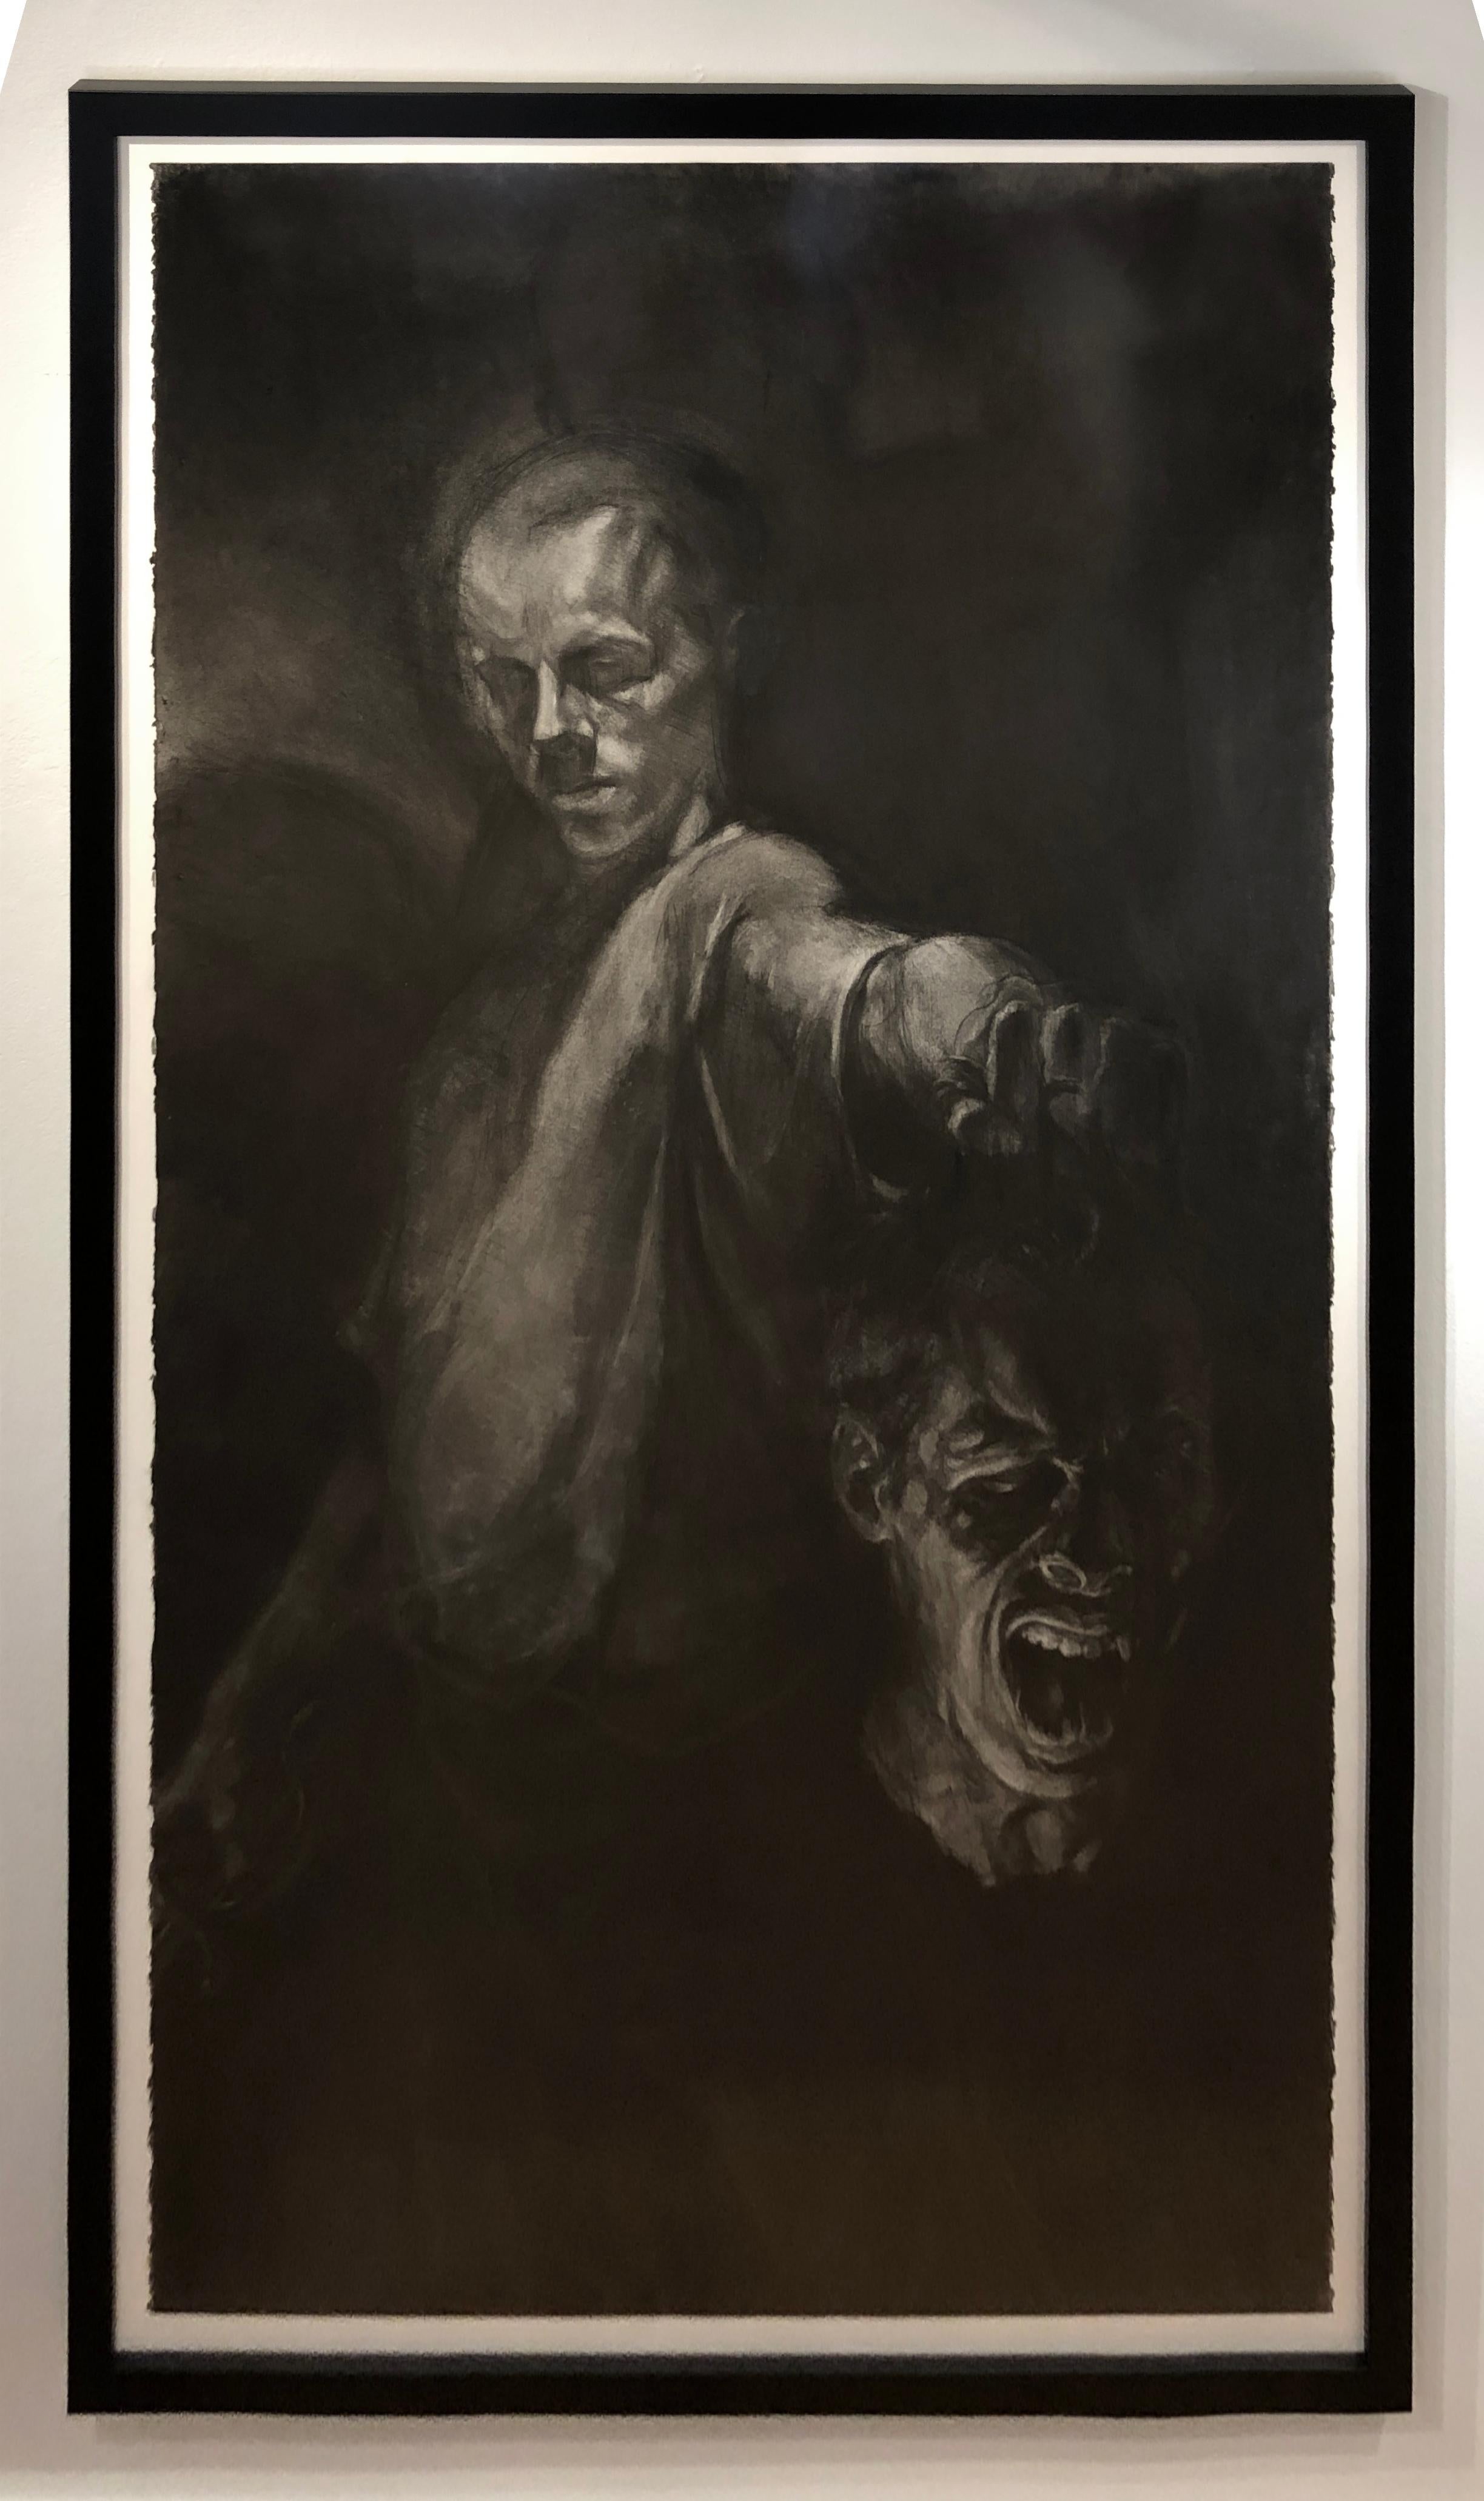 David & Goliath - Caravaggio Inspired Monumental Double Self-Portrait, Charcoal - Painting by Christopher Ganz